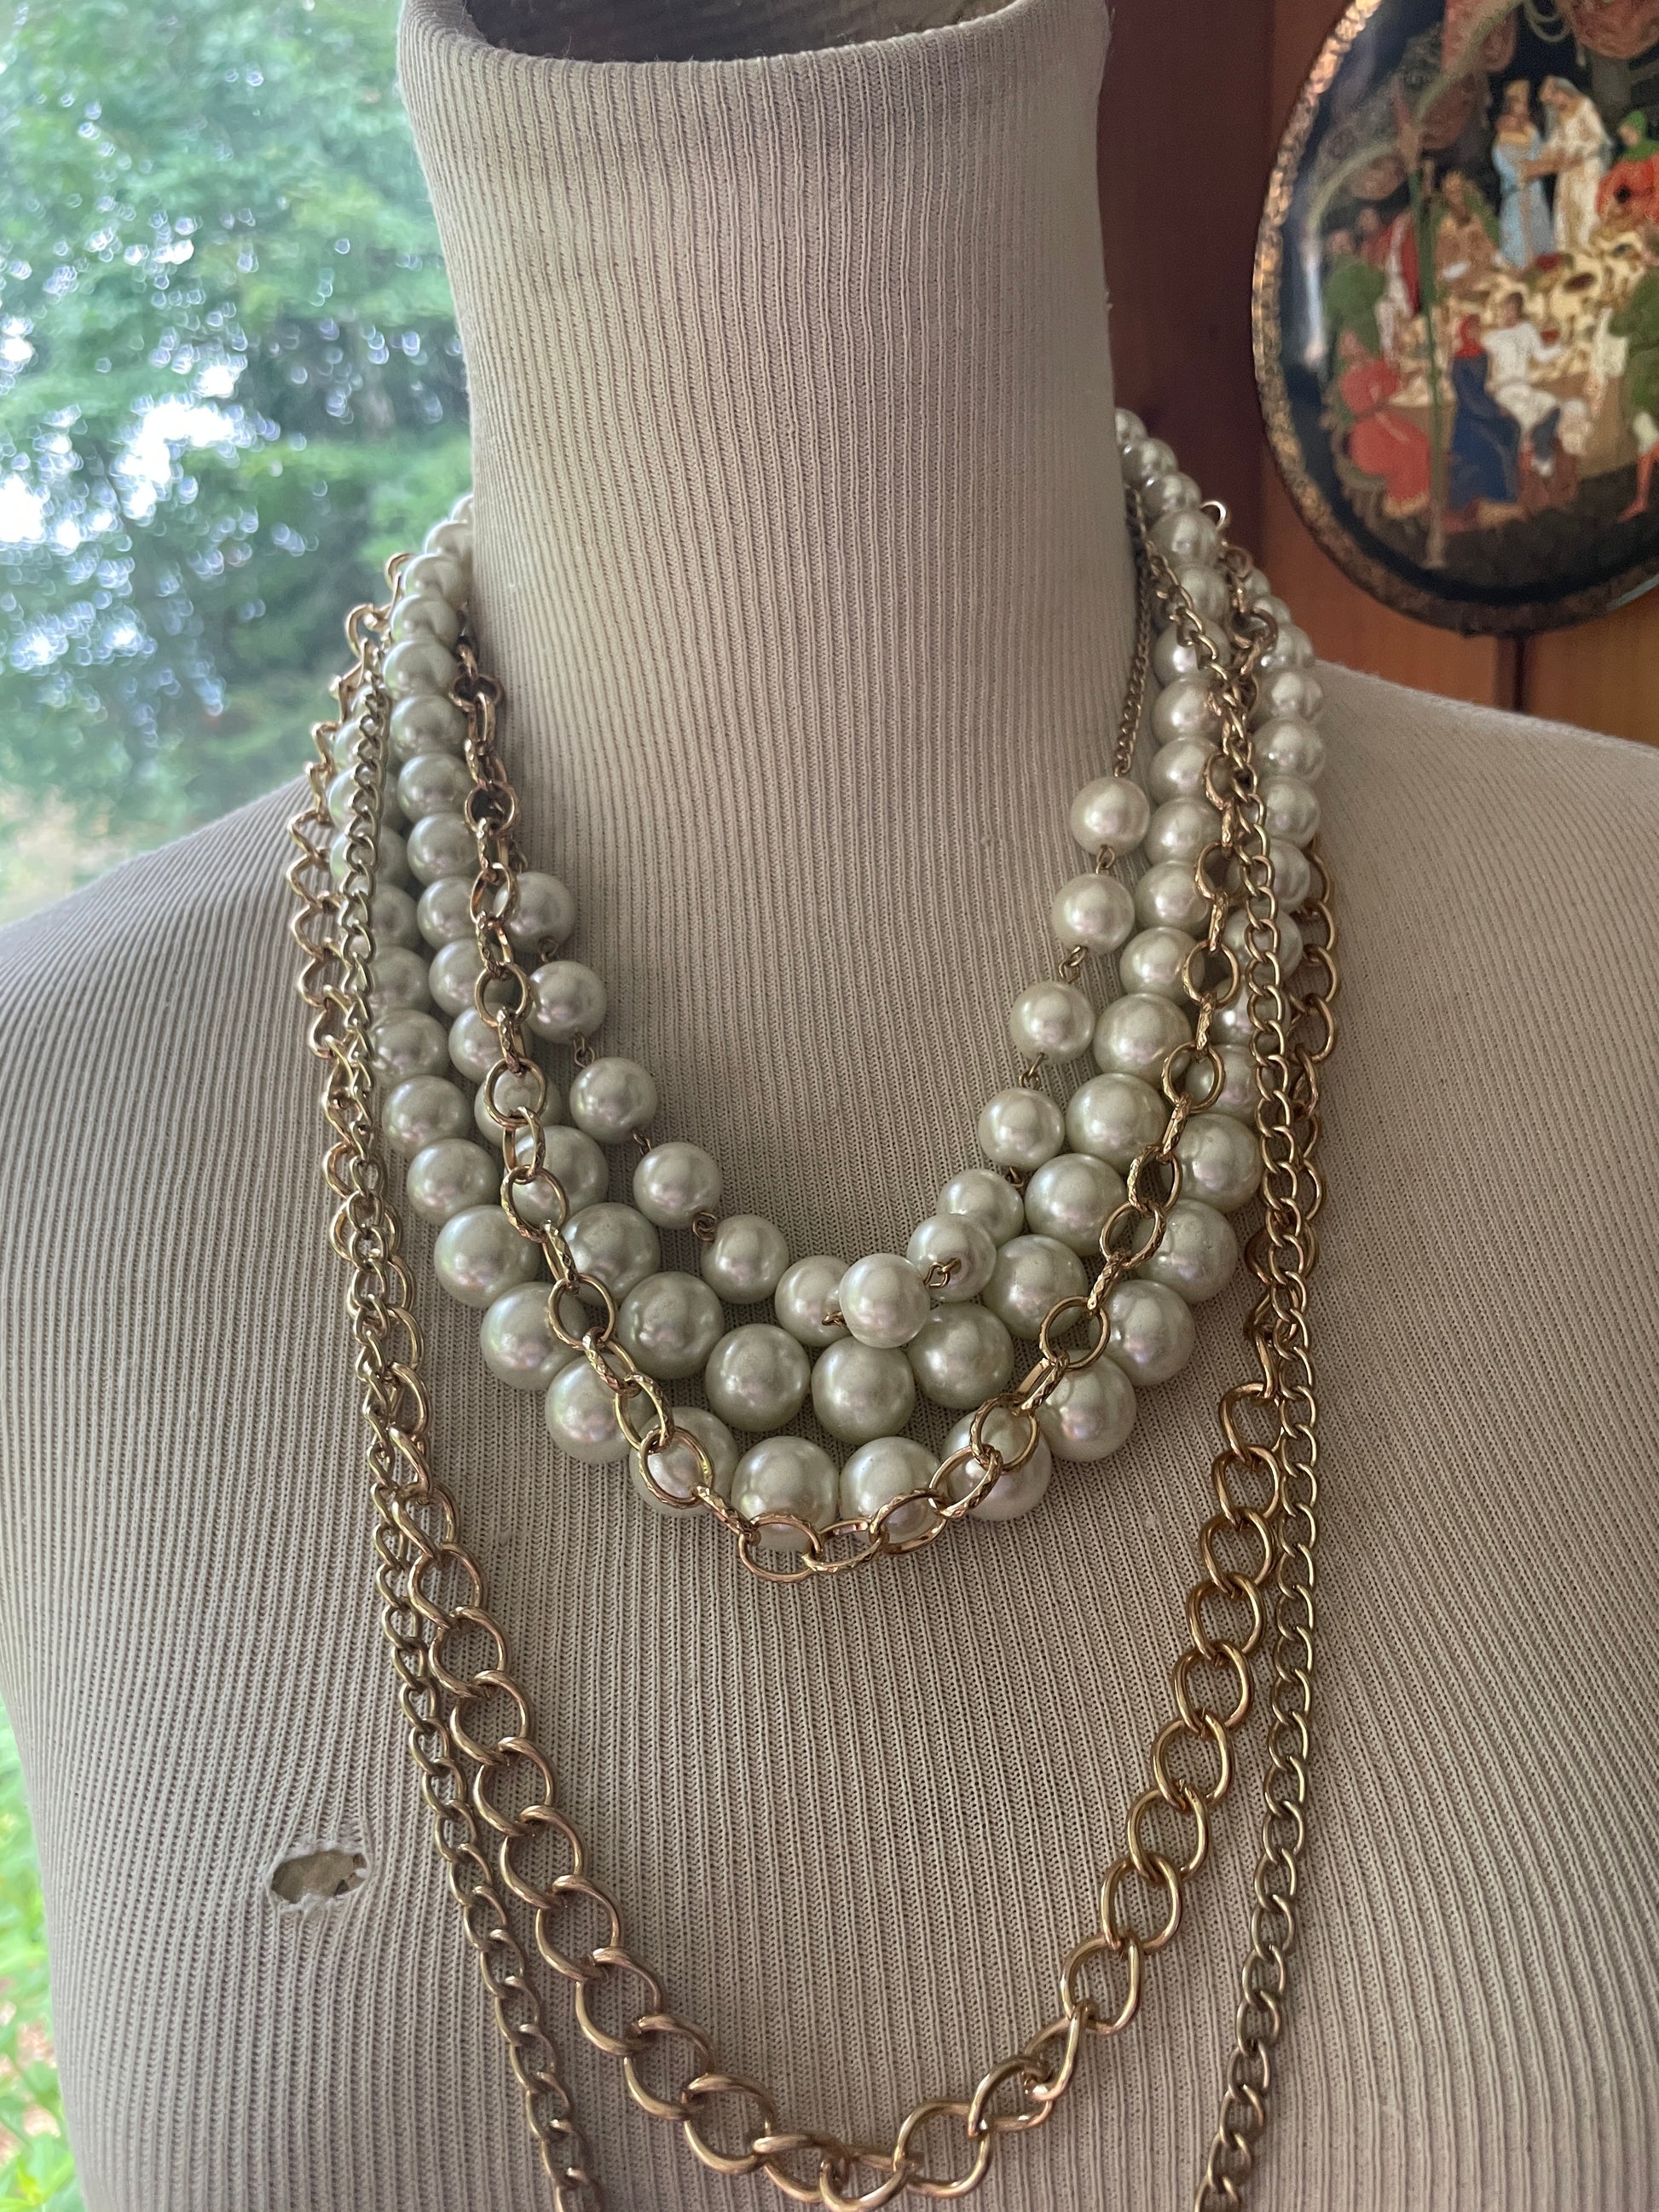  Multiple Layered Chains Faux Pearl 2000 Costume Statement Necklace